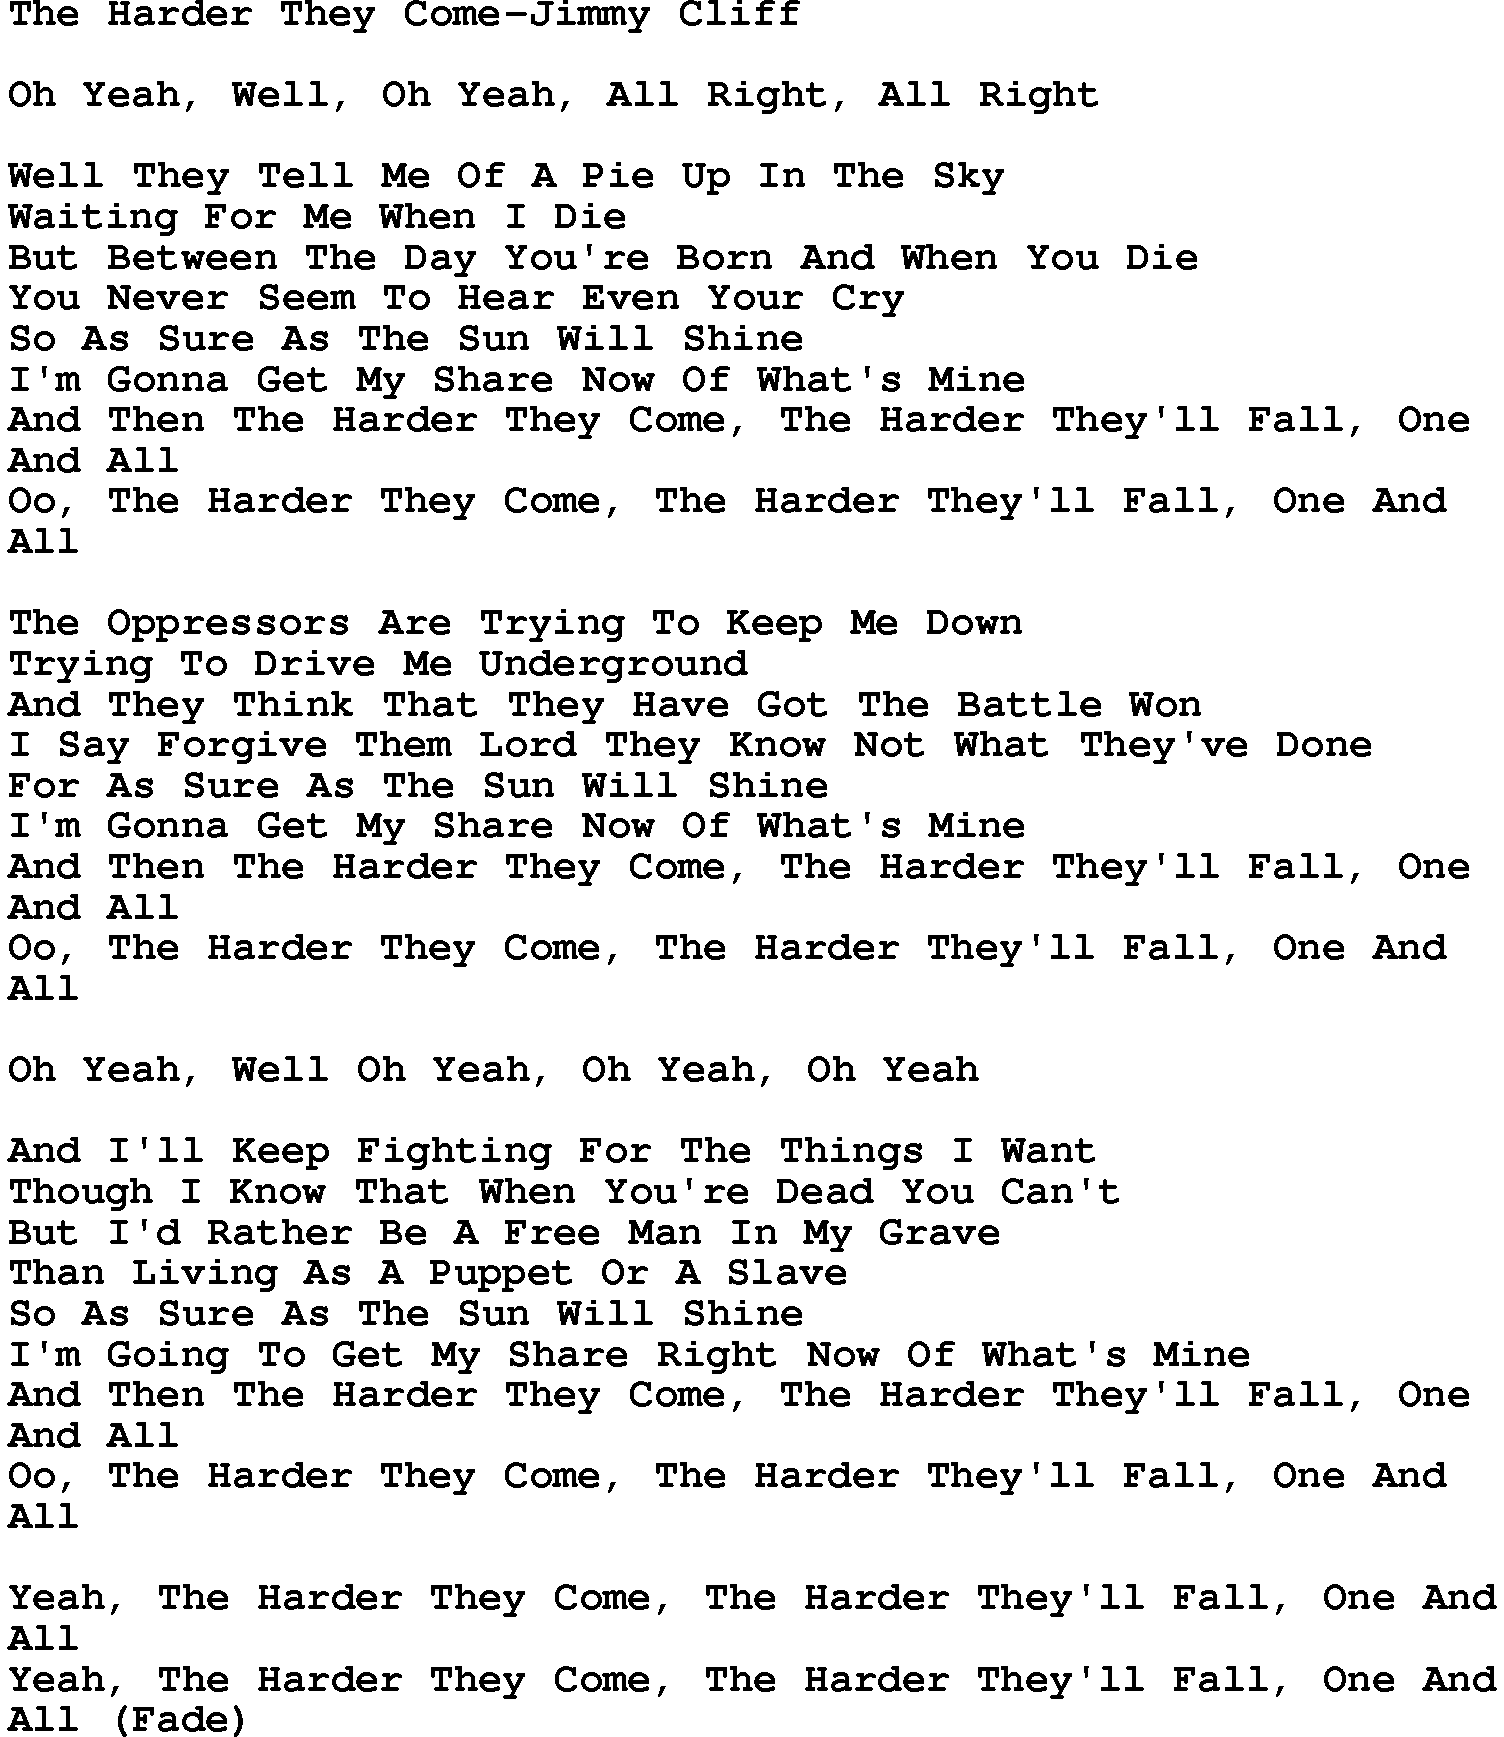 Country music song: The Harder They Come-Jimmy Cliff lyrics and chords